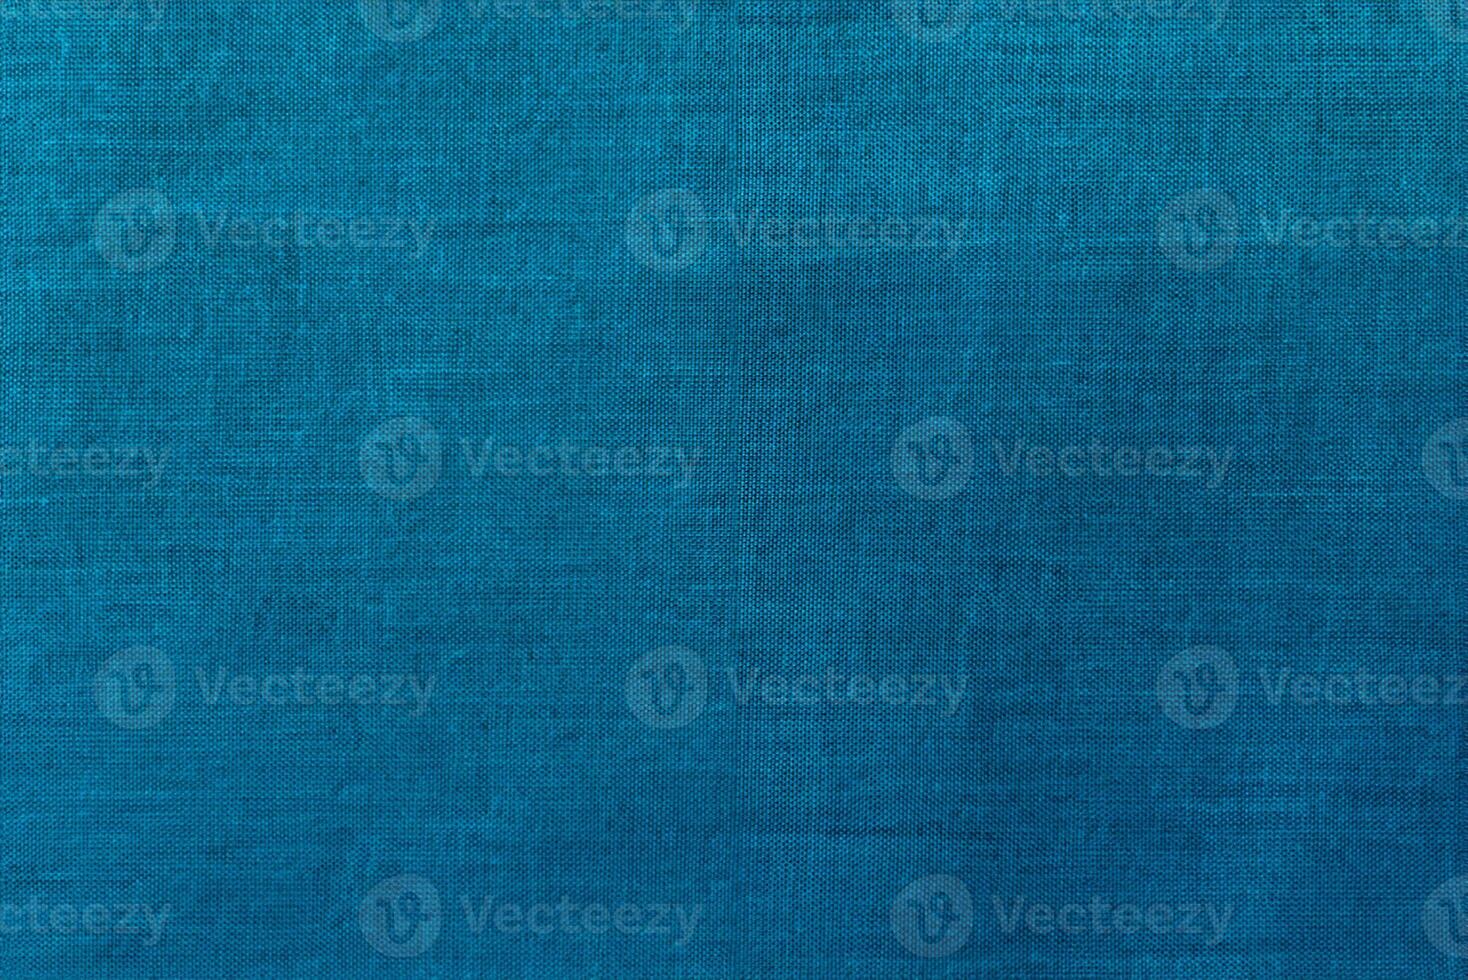 Textured Fabric Background for Design Use photo